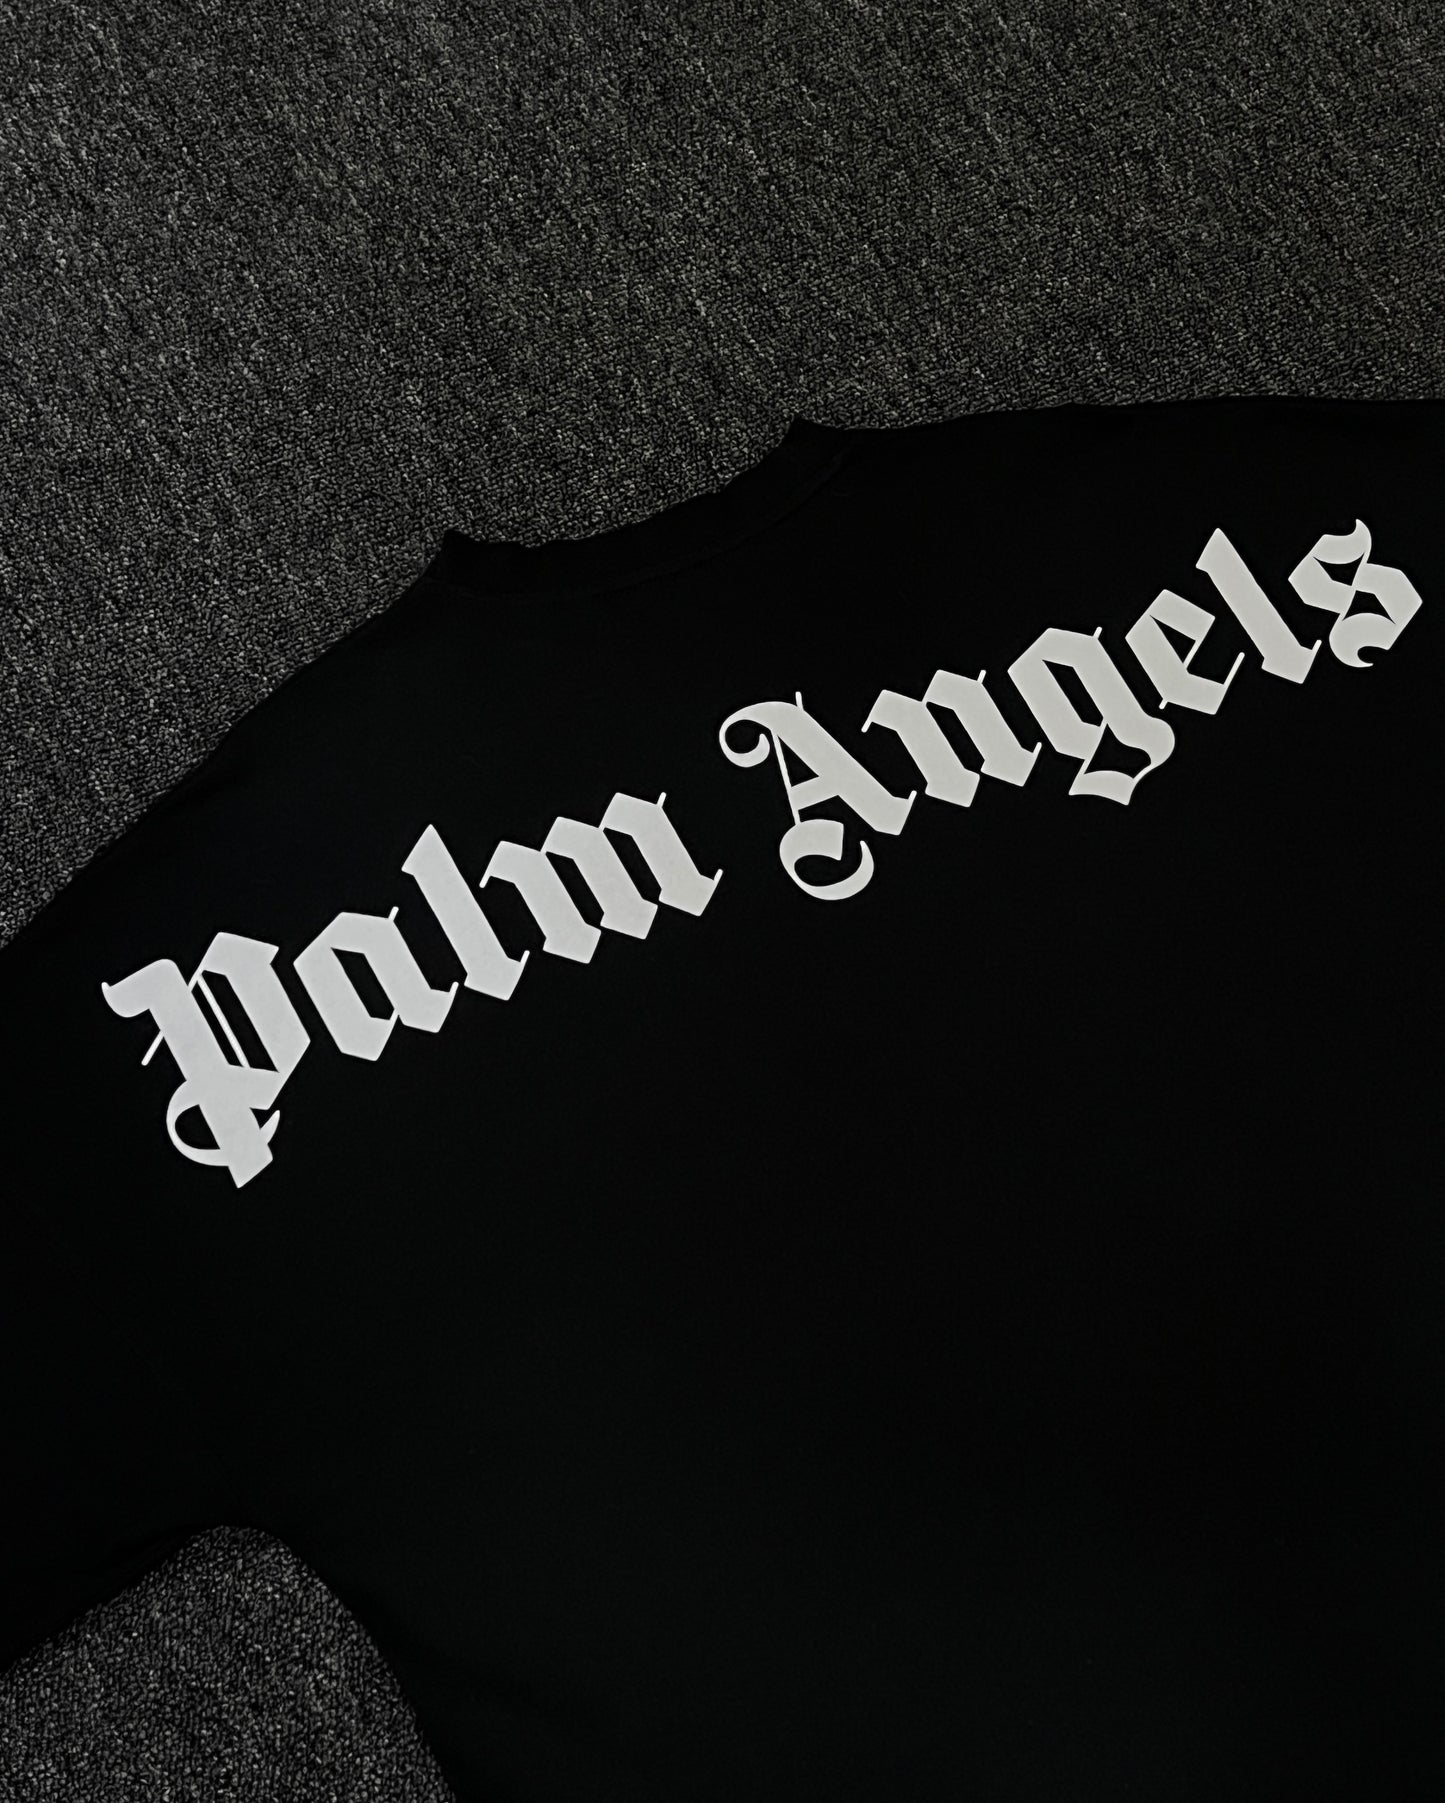 Palm Angels Front And Back Logo Tee